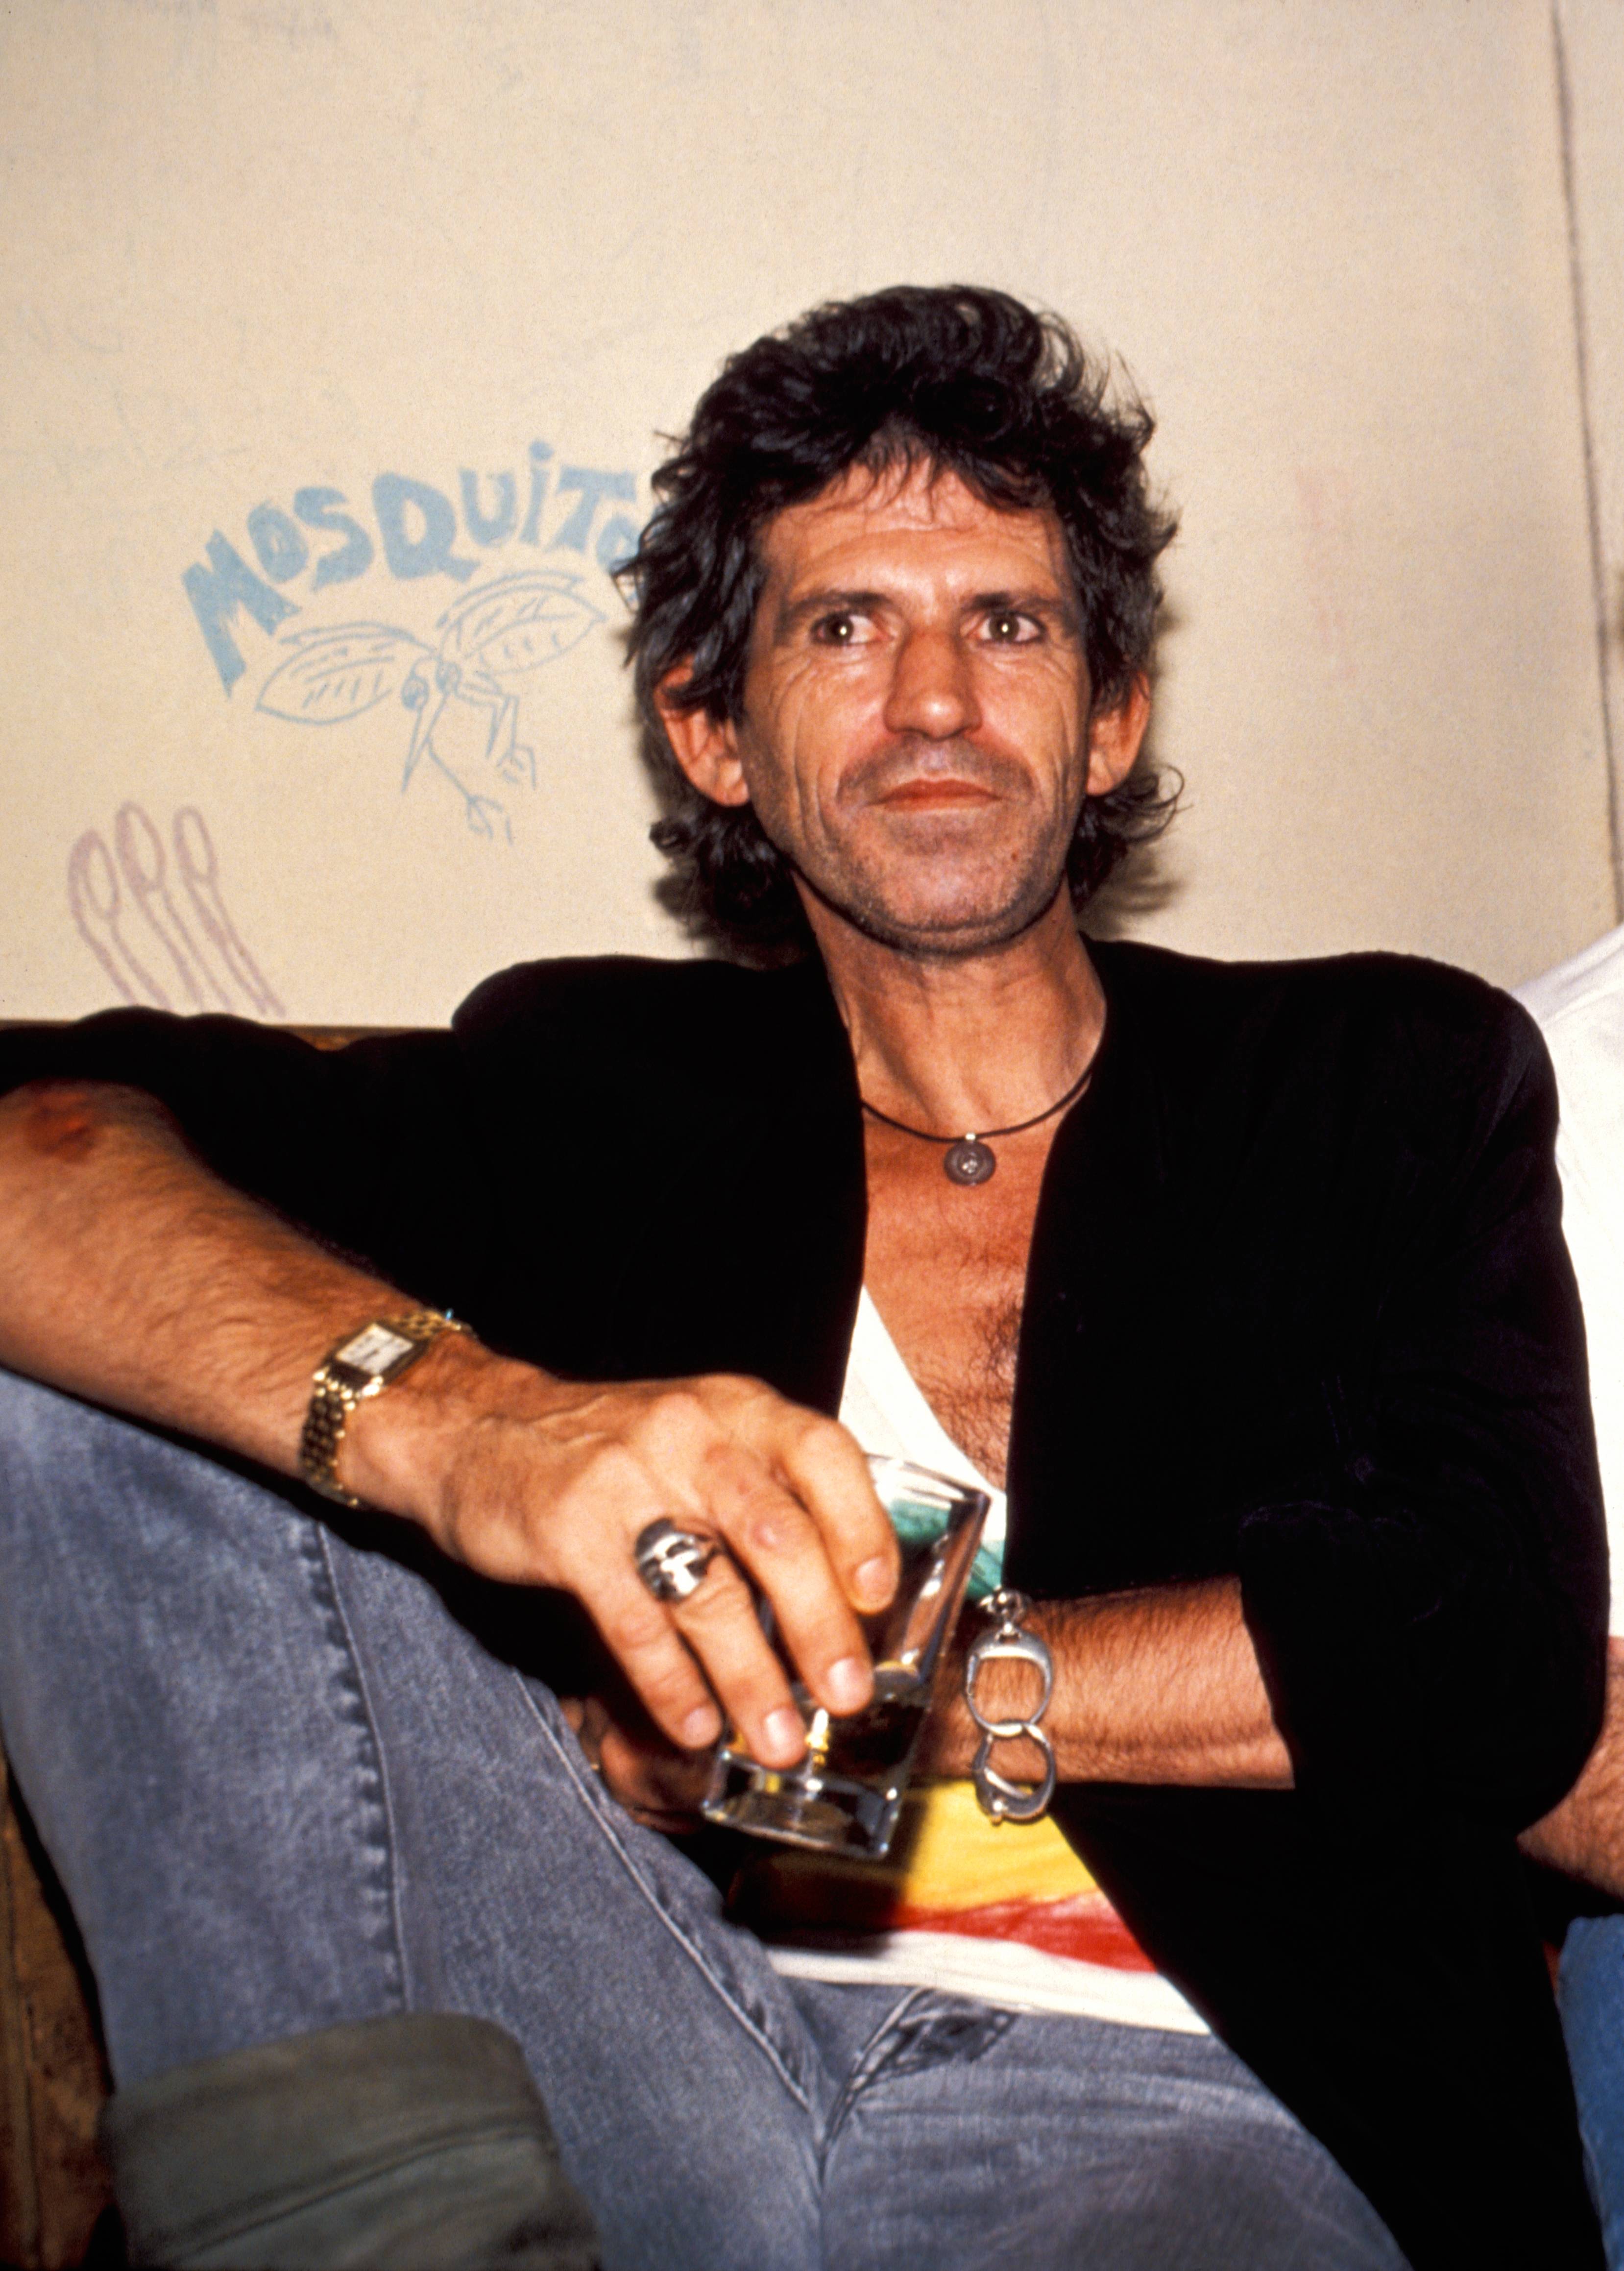 Keith Richards: Our 1985 Cover Story, <i></p>
<p><b>How is Anita [Pallenberg, mother of his first two children]?</b></p>
<p>Anita’s doing very well. Very well. Cleaned up her whole act. I’m very proud of her. Her and Patti actually talk to each other. I’m either very lucky or I’ve done something right. There is nothing hidden from anybody. They talk to each other, visit each other. And Anita still knits me sweaters.</p>
<p>Maybe it’s because we never had the divorce thing. By not getting married and divorced, where the lawyers force you to hate each other, just from the point of “As your lawyers, Mrs. So-and-so, I advise you to get this much out of that sonofabitch.” And I suggest we change the venue of this divorce, Mr. So-and-so, because they can’t screw so much out of you here.” So you become implacable enemies. Anyone that survives a divorce and still talks to each other is a miracle. People can actually get along a lot better without resorting to the law.</p>
<p><b>Then why did you make it legal with Patti?</b></p>
<p>Because it’s me now, and it’s Patti, and it’s a different point of view. Anita and I, in the ’60s, were never interested in marriage. It seemed an archaic and dumb thing to do just to have a child. And that was then and that was Anita, and that was me and Anita. Patti and I have a different relationship.</p>
<p>And besides, shit, I’m gonna try anything. And if I’m gonna try anything like marriage, I’m only gonna try it once. And if I’m gonna try it once, it’s gonna be with this chick. ‘Cuz I’m not about to try it twice. I ain’t a Texan, I ain’t Bobby Keys—if he loves her, he’s gotta marry her. It’s just a different point of view. For me, it’s worked out fine, ‘cuz I can still talk to my ex-whatever. And there are other exes before Anita, and I can still talk to <i>them</i>.</p>
<p><b>How did you meet Patti?</b></p>
<p>It was engineered by other people, matchmakers. It was my birthday [1979]. We were all in New York. A few people had the same idea at the same time for a year before I ever met Patti. Every other night, somebody would say, “Oh, you should meet this Patti Hansen.” I kept asking, “Why should I meet this Patti Hansen.” I found out later. But it was one of those inevitable things. She was getting the same stuff. Until eventually somebody said, “They’re never gonna get it together themselves. We have to throw them together.”</p>
<p><b>What did her family think of you at first?</b></p>
<p>The first time I went to meet her parents, I was out of it. Out of my brain. I’d been up for days, got drunk, figured I’d keep myself real mellow. Instead, I wound up smashing up stuff. But they dug it. I went crazy and it didn’t offend them. I could’ve blown it, you know, “Never come back here again!” I was my worst.</p>
<p>After all this time, I’d never been through this trip, meeting a girl’s parents, so it was important to me. Try to be real cool, and I overdid it. I went totally over the top. But they dug me for it. That was the first indication that this was family I could do with if they could take that.</p>
<p><b>The old “Would you let your daughter marry a Rolling Stone?”</b></p>
<p>I’m still not finished with that, after all these years. Once those things are pinned on you, they stick with you forever. It might seem slightly silly when you’re 60 or 70 years old.</p>
</p><p>To see our running list of the top 100 greatest rock stars of all time, <a href=